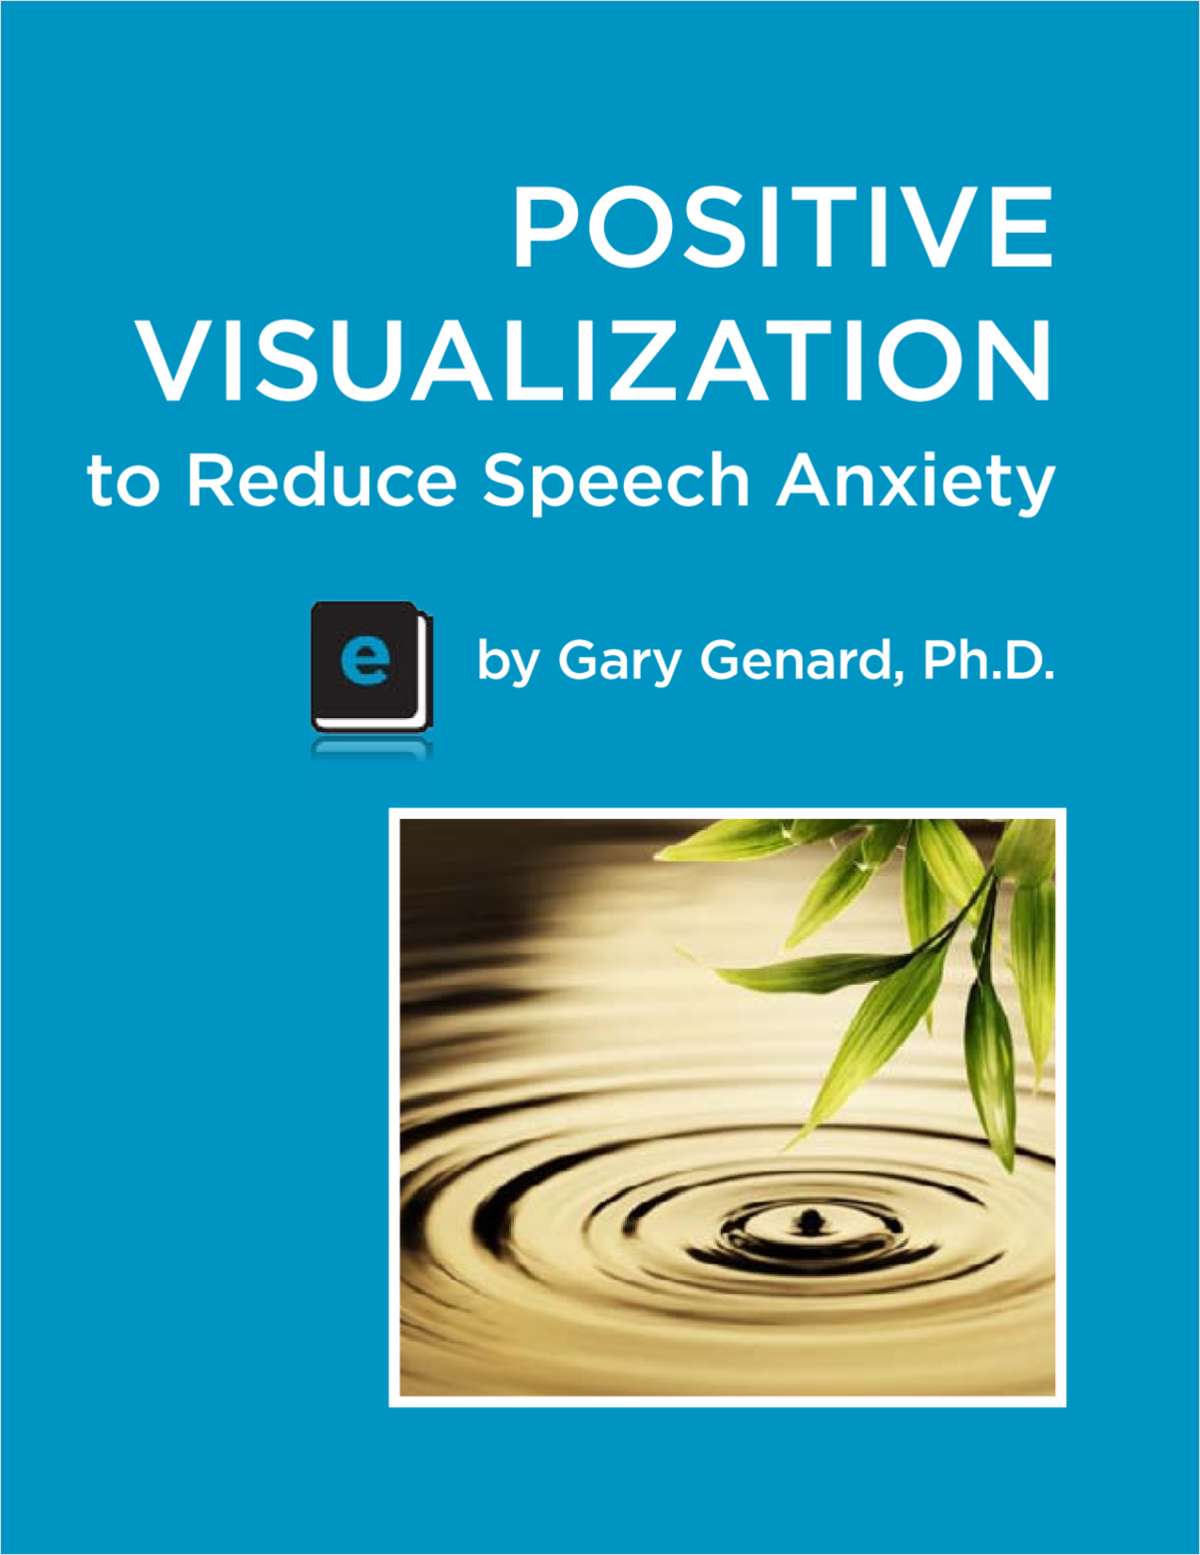 w thab130c8 - Positive Visualization to Reduce Speech Anxiety